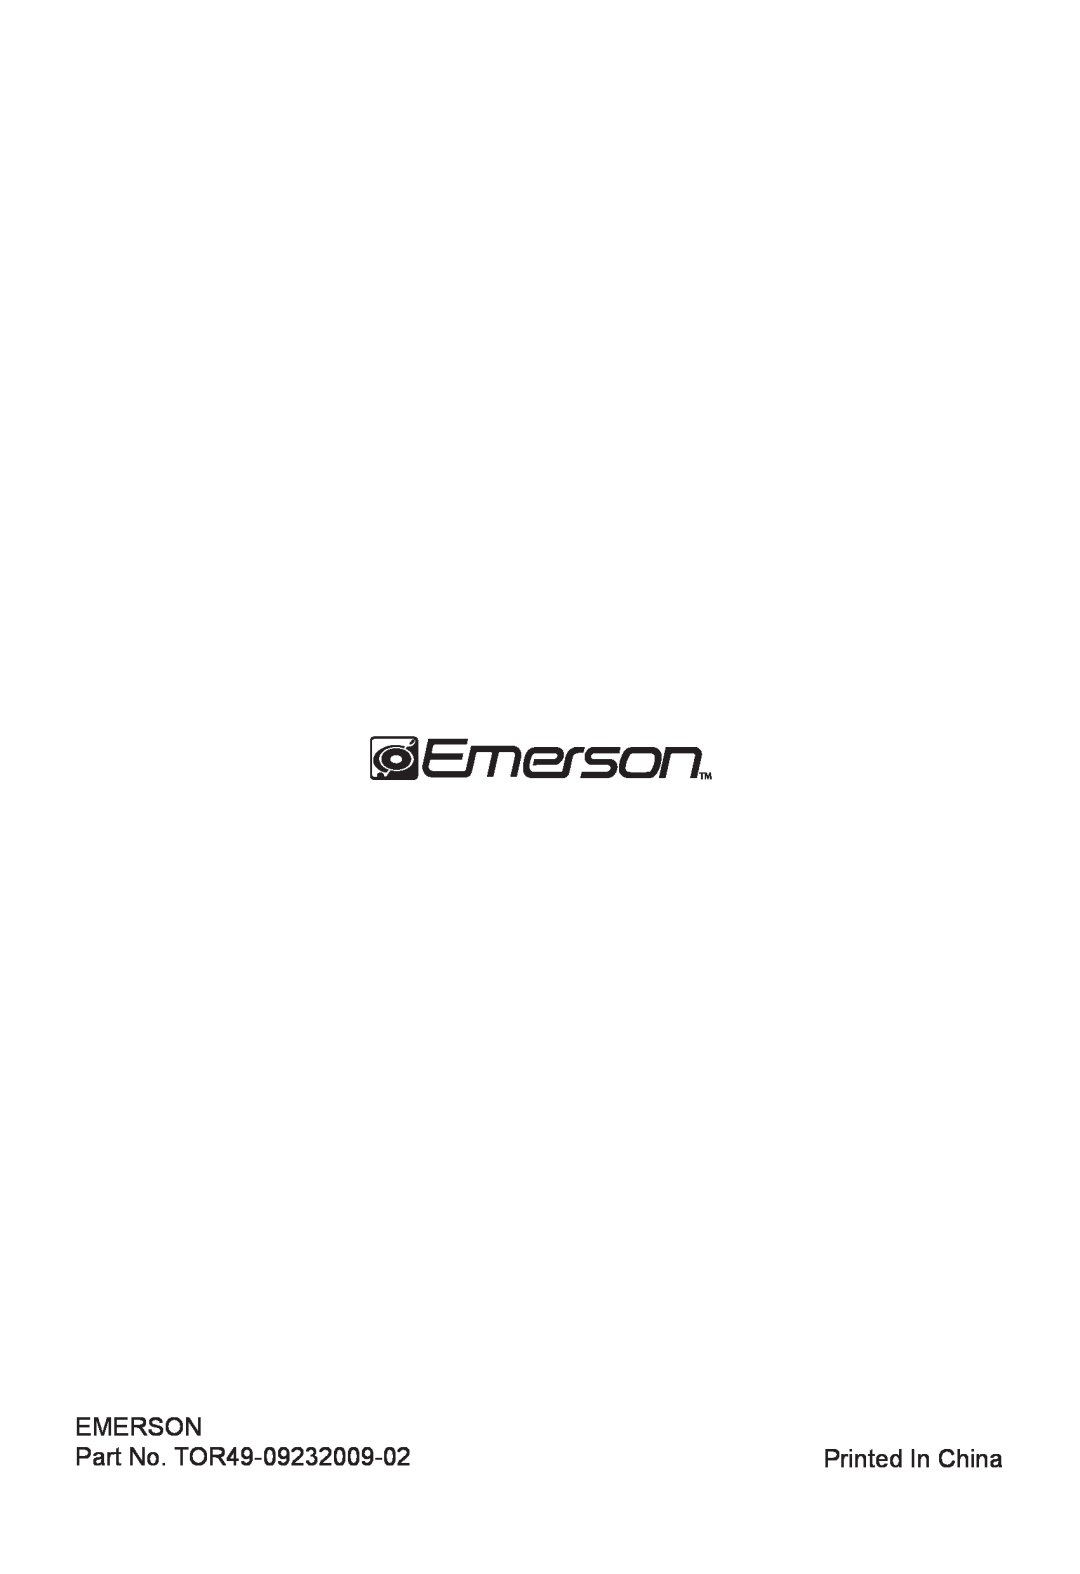 Emerson owner manual Emerson, Part No. TOR49-09232009-02, Printed In China 